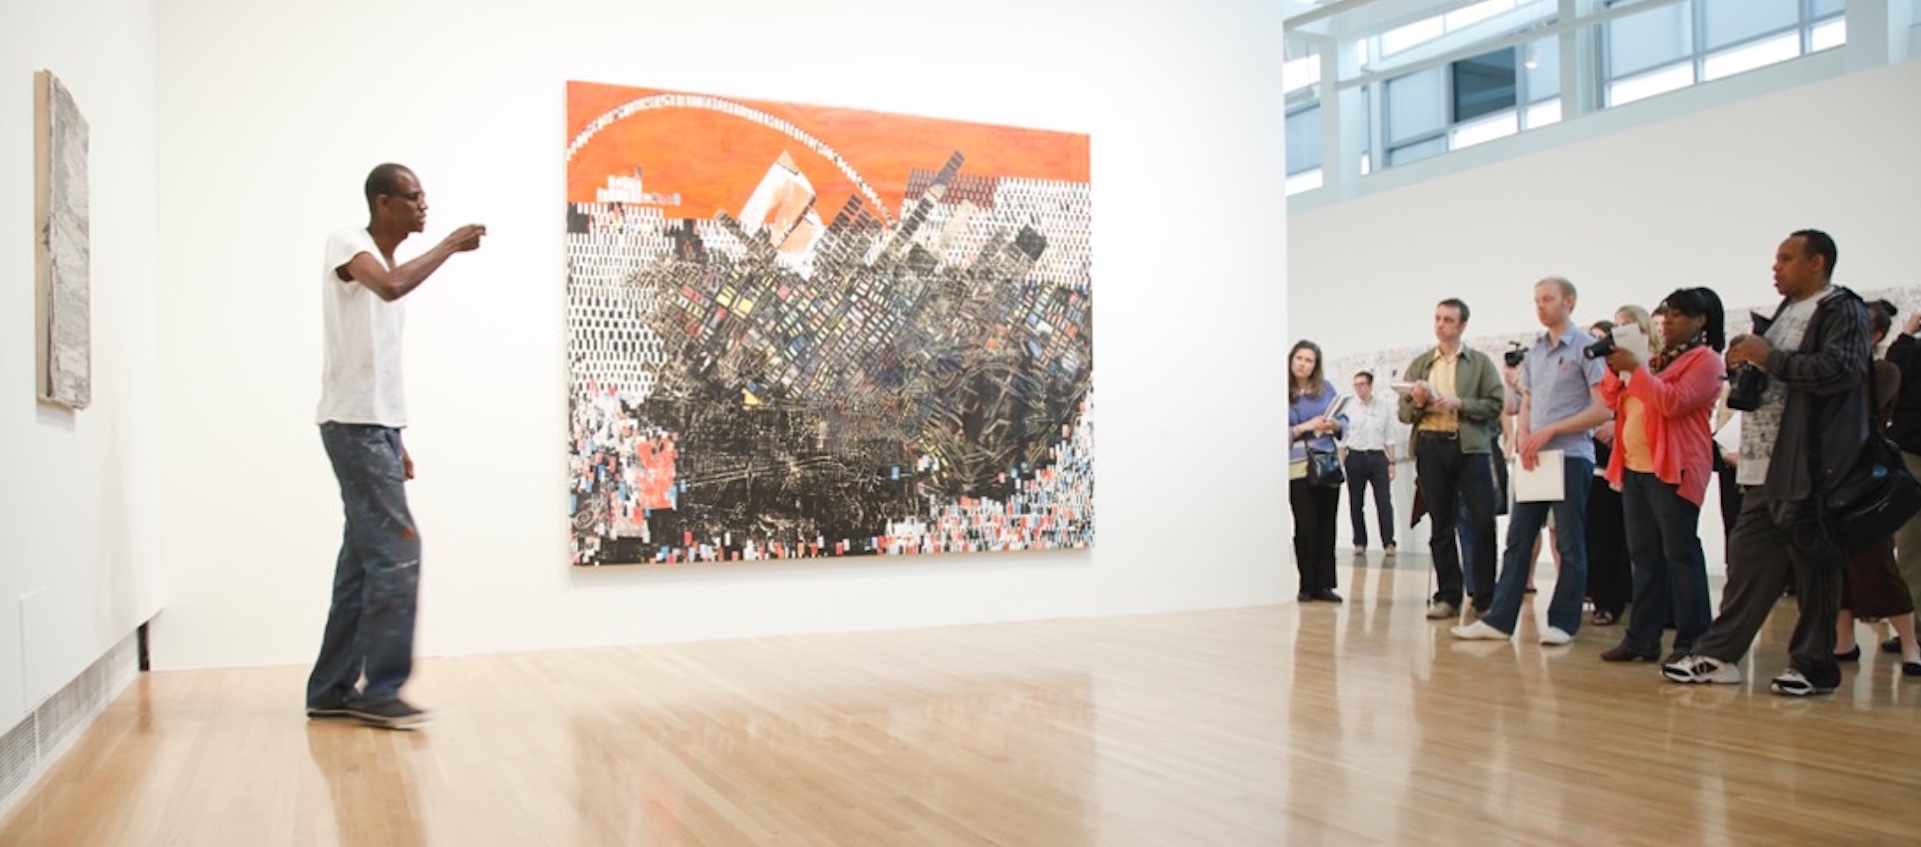 Artist Mark Bradford standing next to one of his paintings in the Wexner Center for the Arts galleries as he leads a tour through his 2010 solo exhibition 